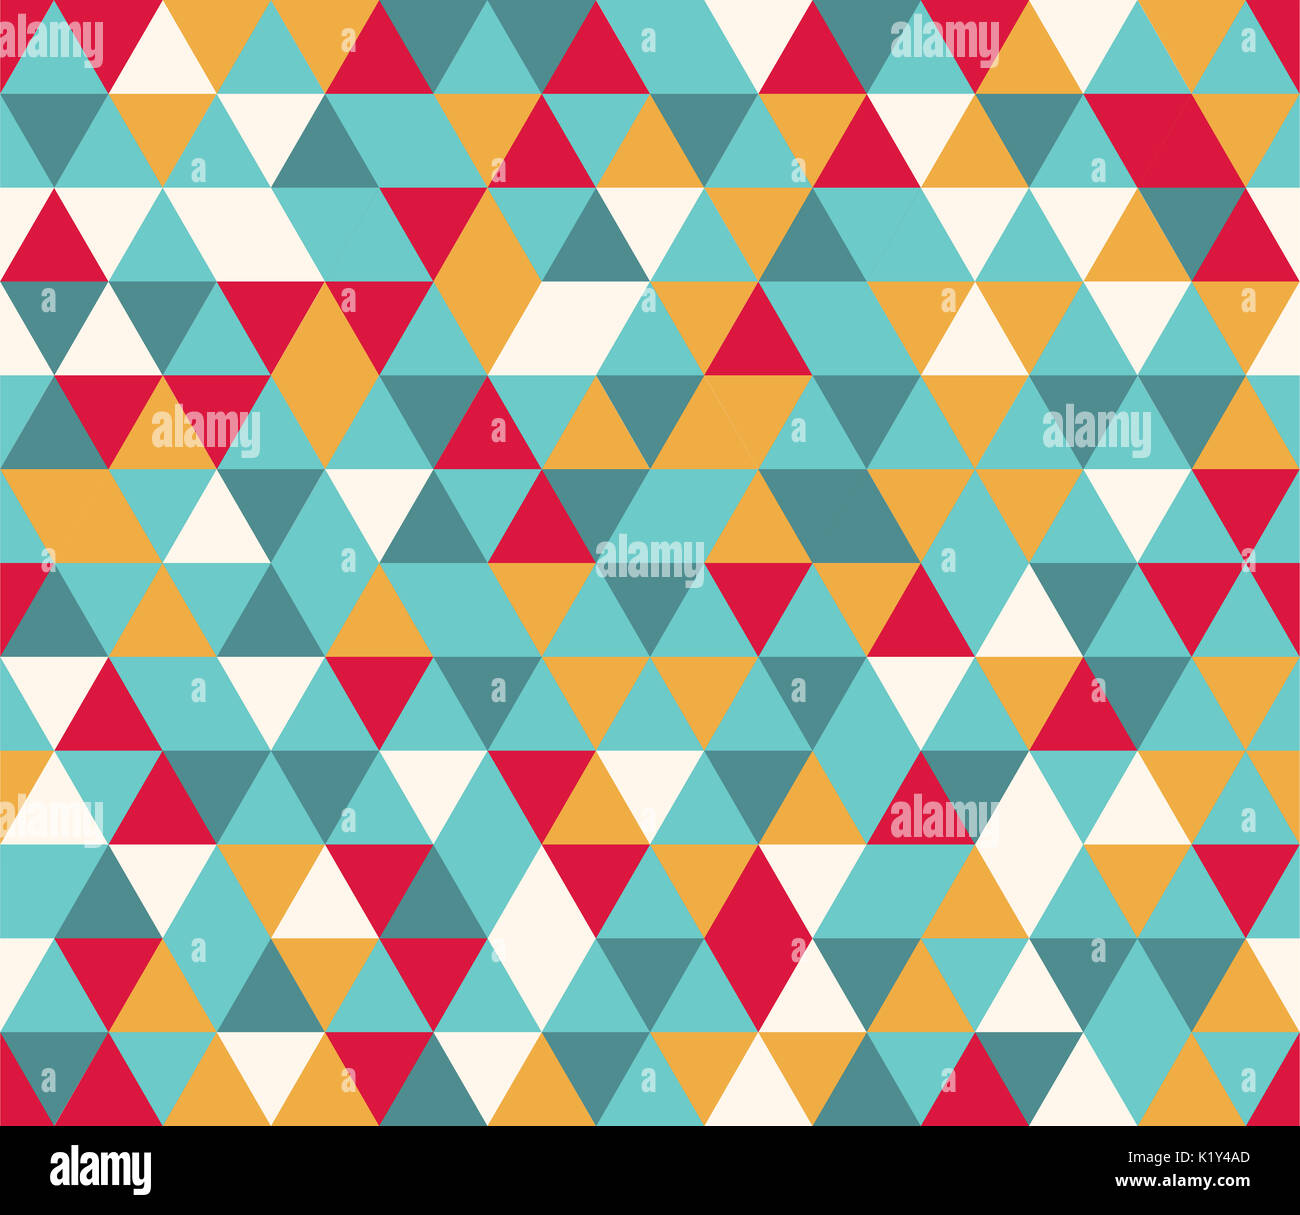 https://c8.alamy.com/comp/K1Y4AD/colorful-triangle-background-seamless-pattern-K1Y4AD.jpg